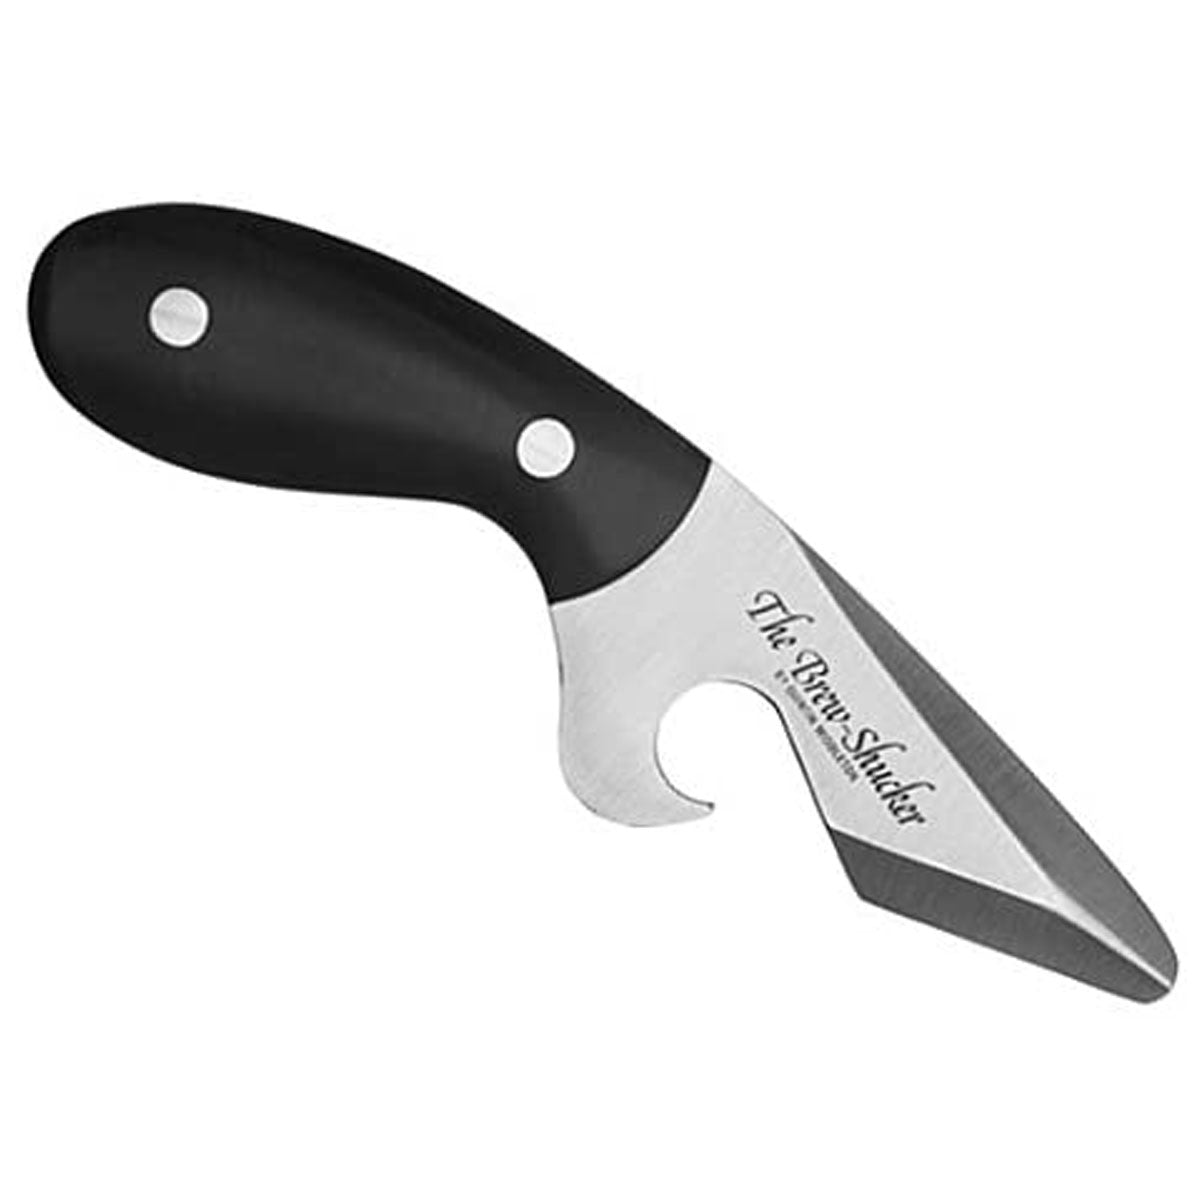 customize cheap oyster shucking knives stainless